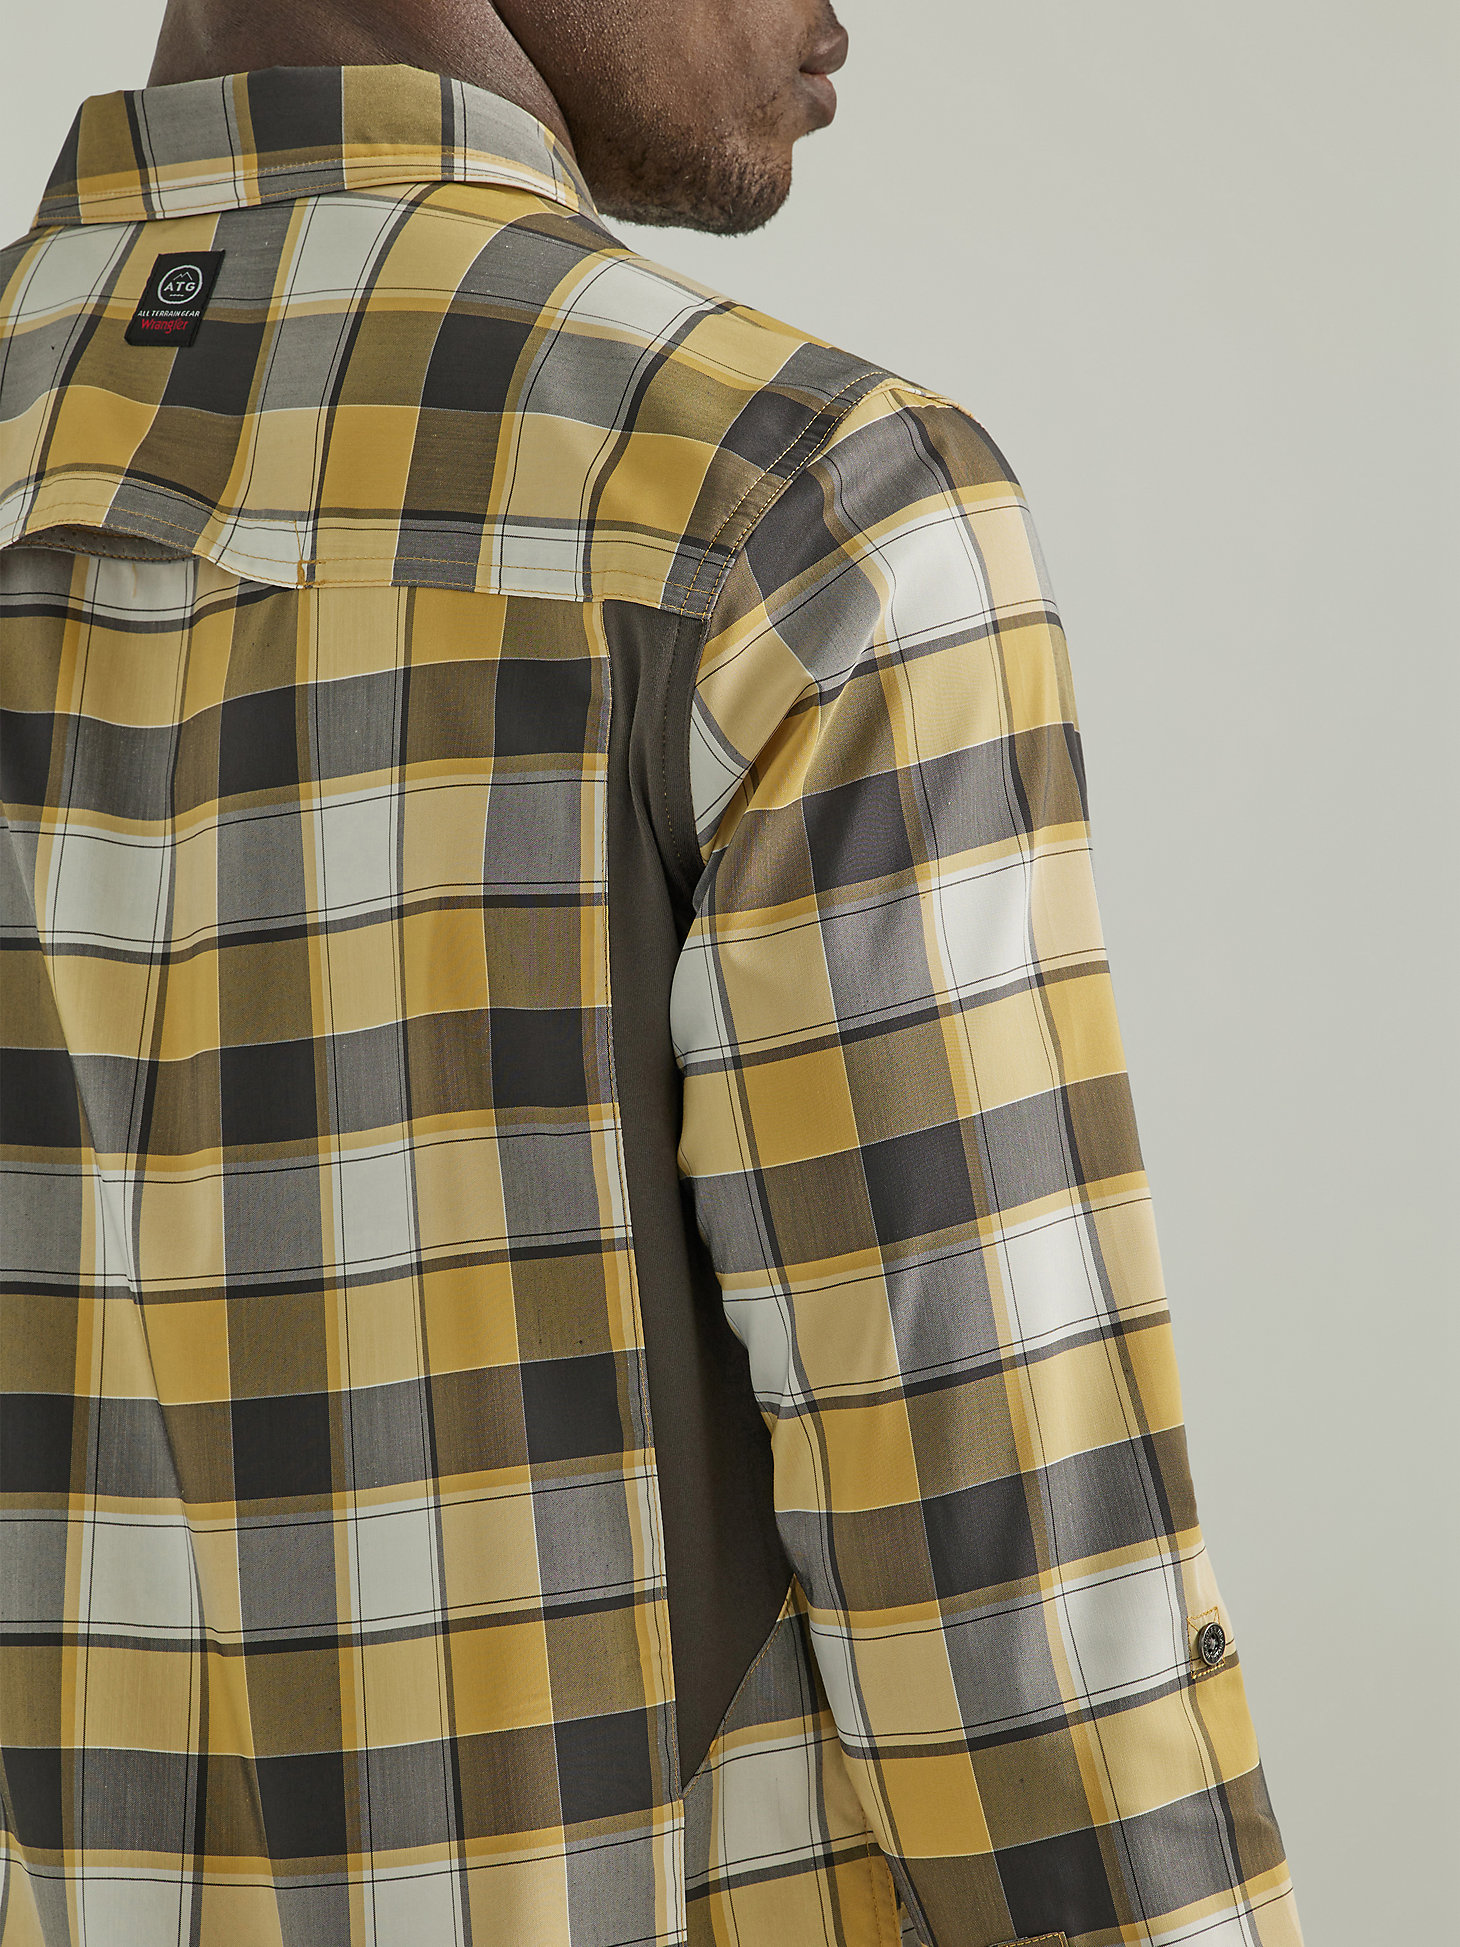 ATG By Wrangler™ Plaid Mixed Material Shirt in Travertine alternative view 5